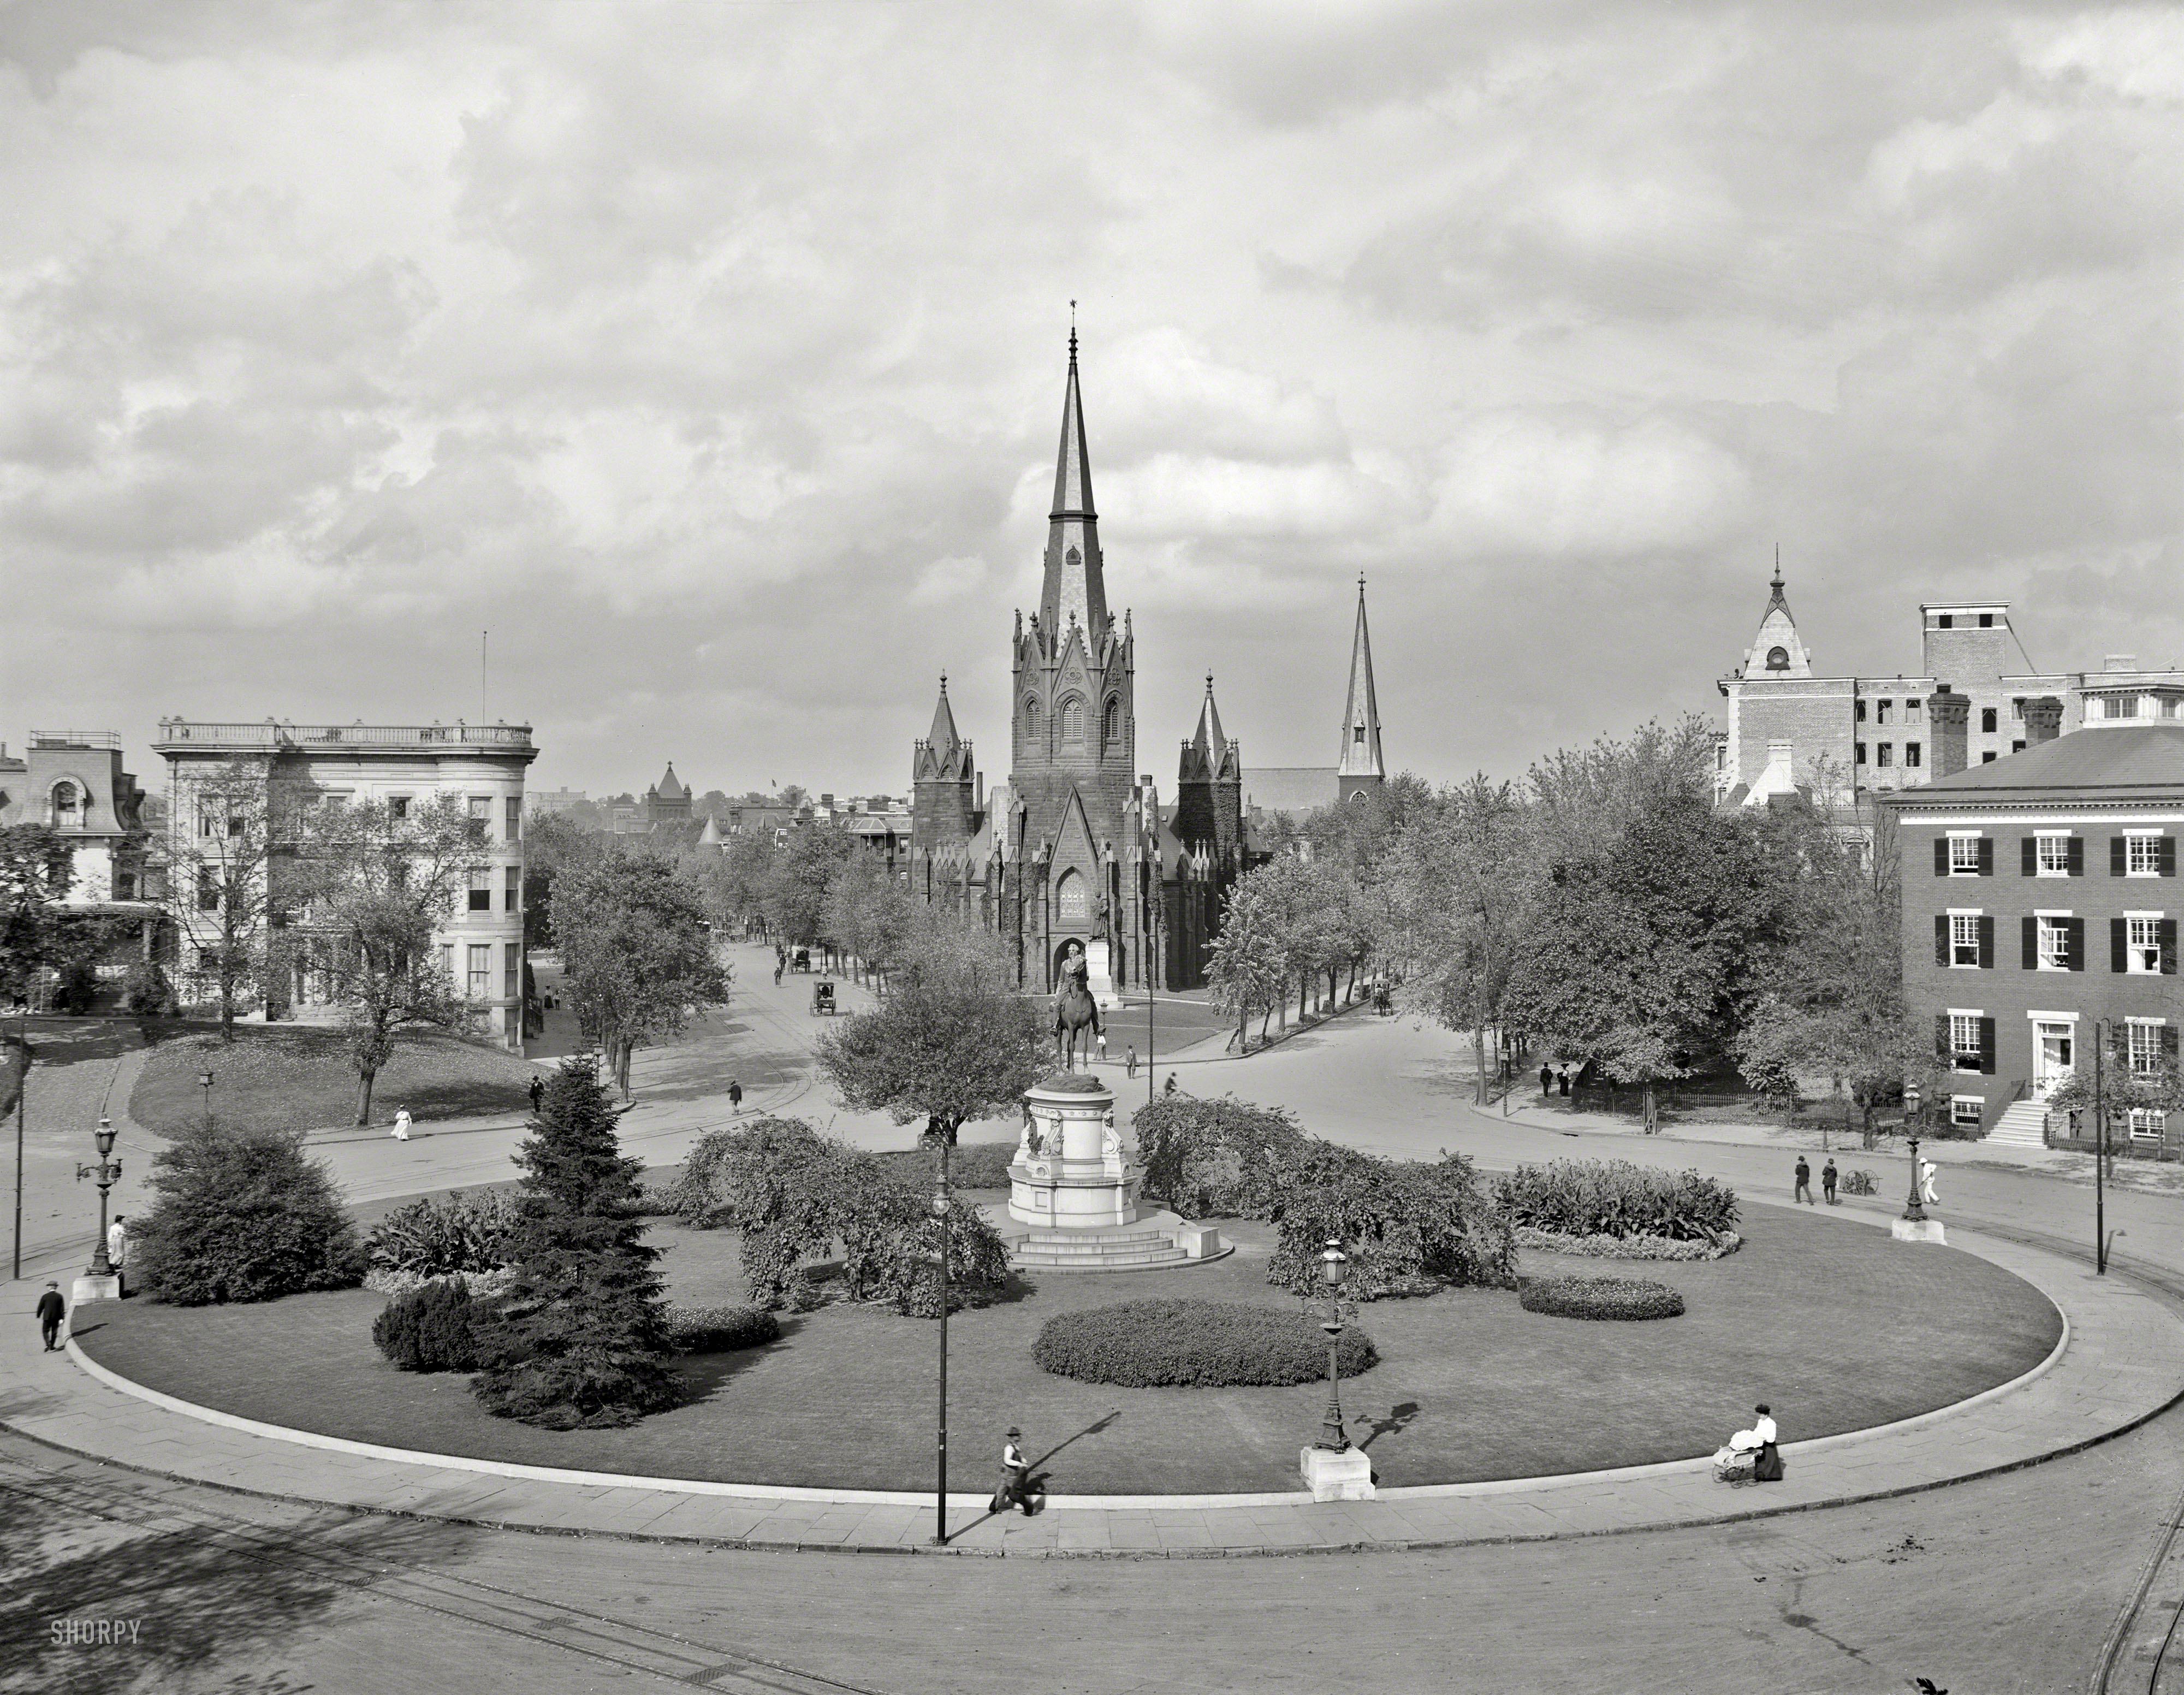 &nbsp; &nbsp; &nbsp; &nbsp; Named for George Henry Thomas, Civil War general and, from his perch on the plinth, observer of countless traffic-circle fender-benders.
Thomas Circle and Luther Place Memorial Church in Washington, D.C., circa 1906. 8x10 inch glass negative, Detroit Publishing Company. View full size.